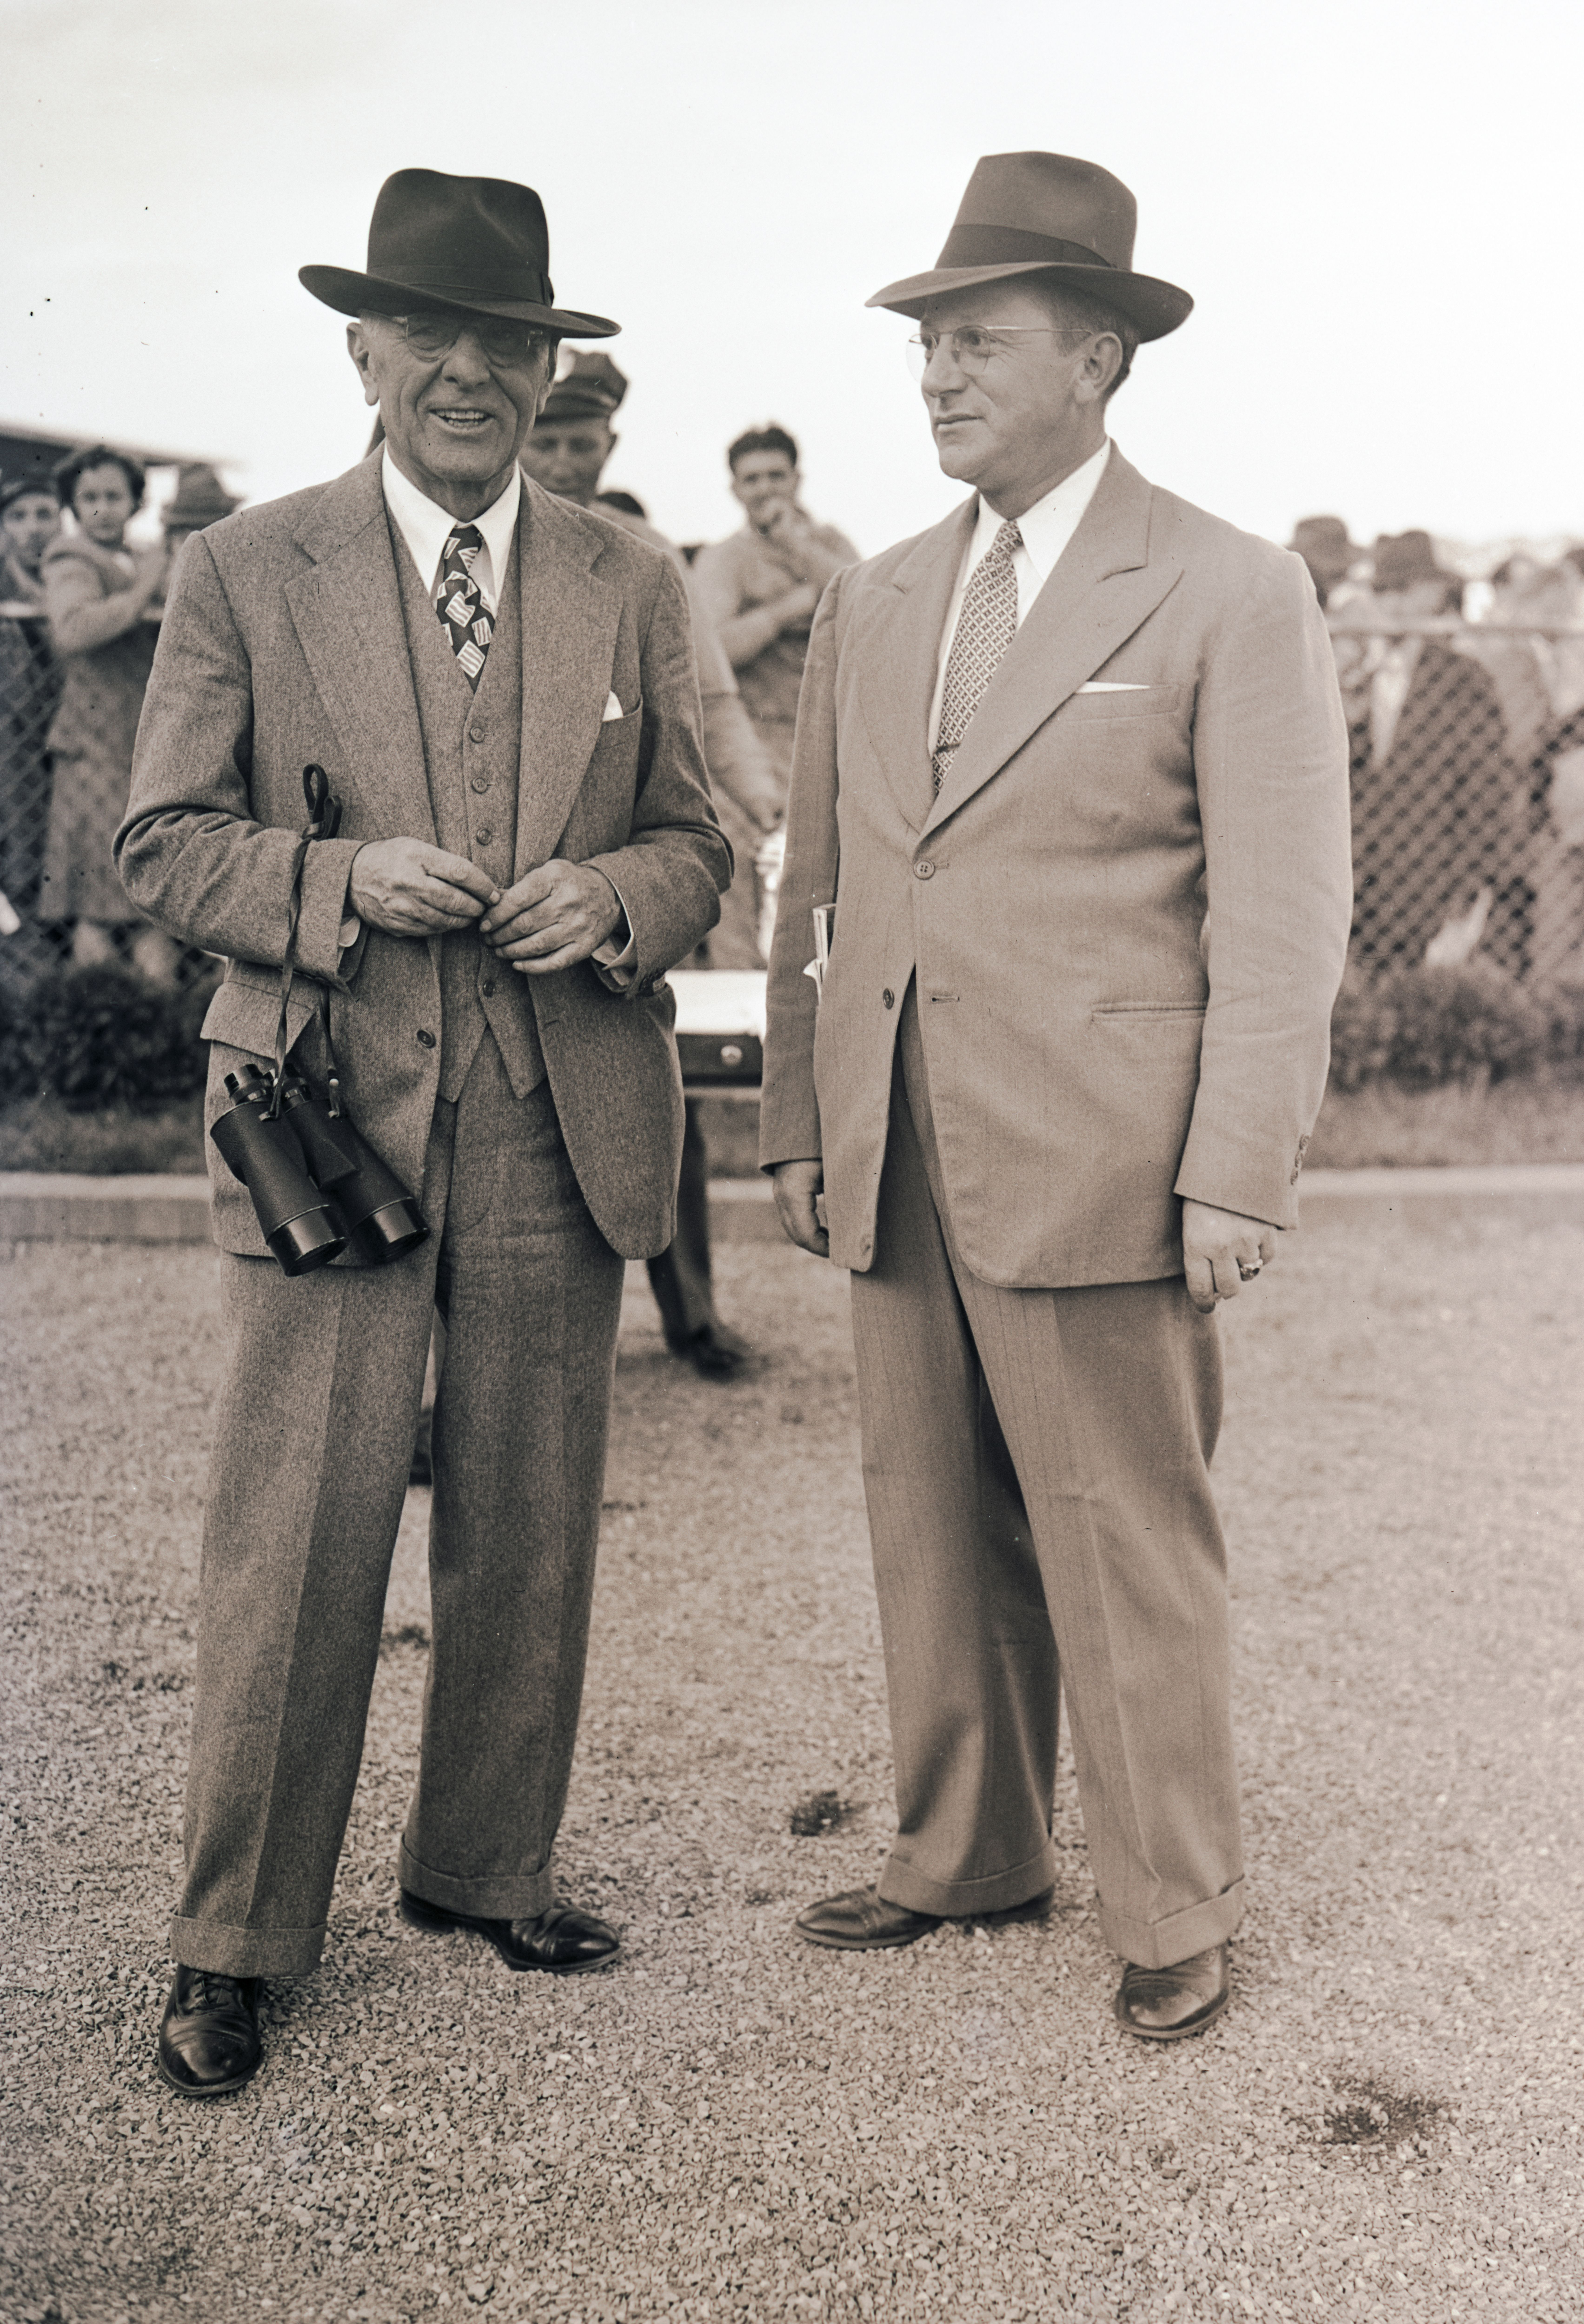 Max Hirsch, left, and Oscar White at Aqueduct, 1947 (Keeneland Library Morgan Collection)